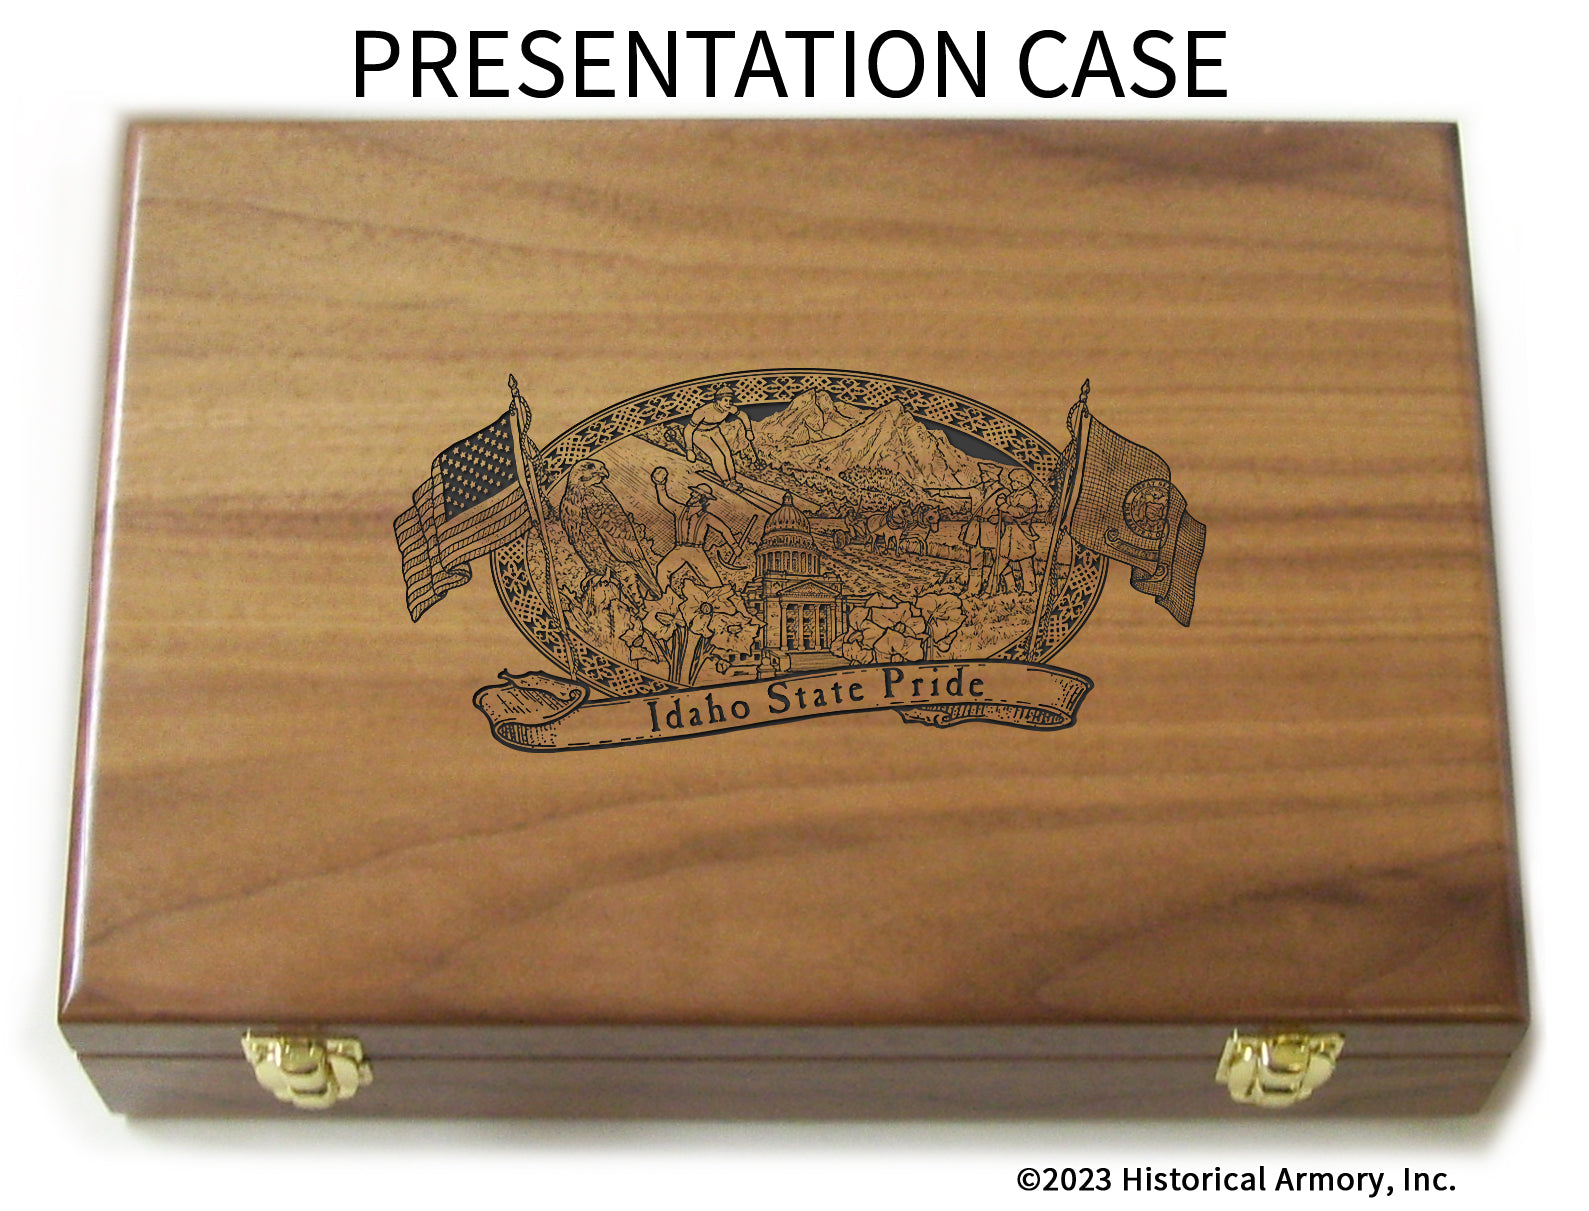 Idaho State Pride Limited Edition Engraved 1911 Presentation Case